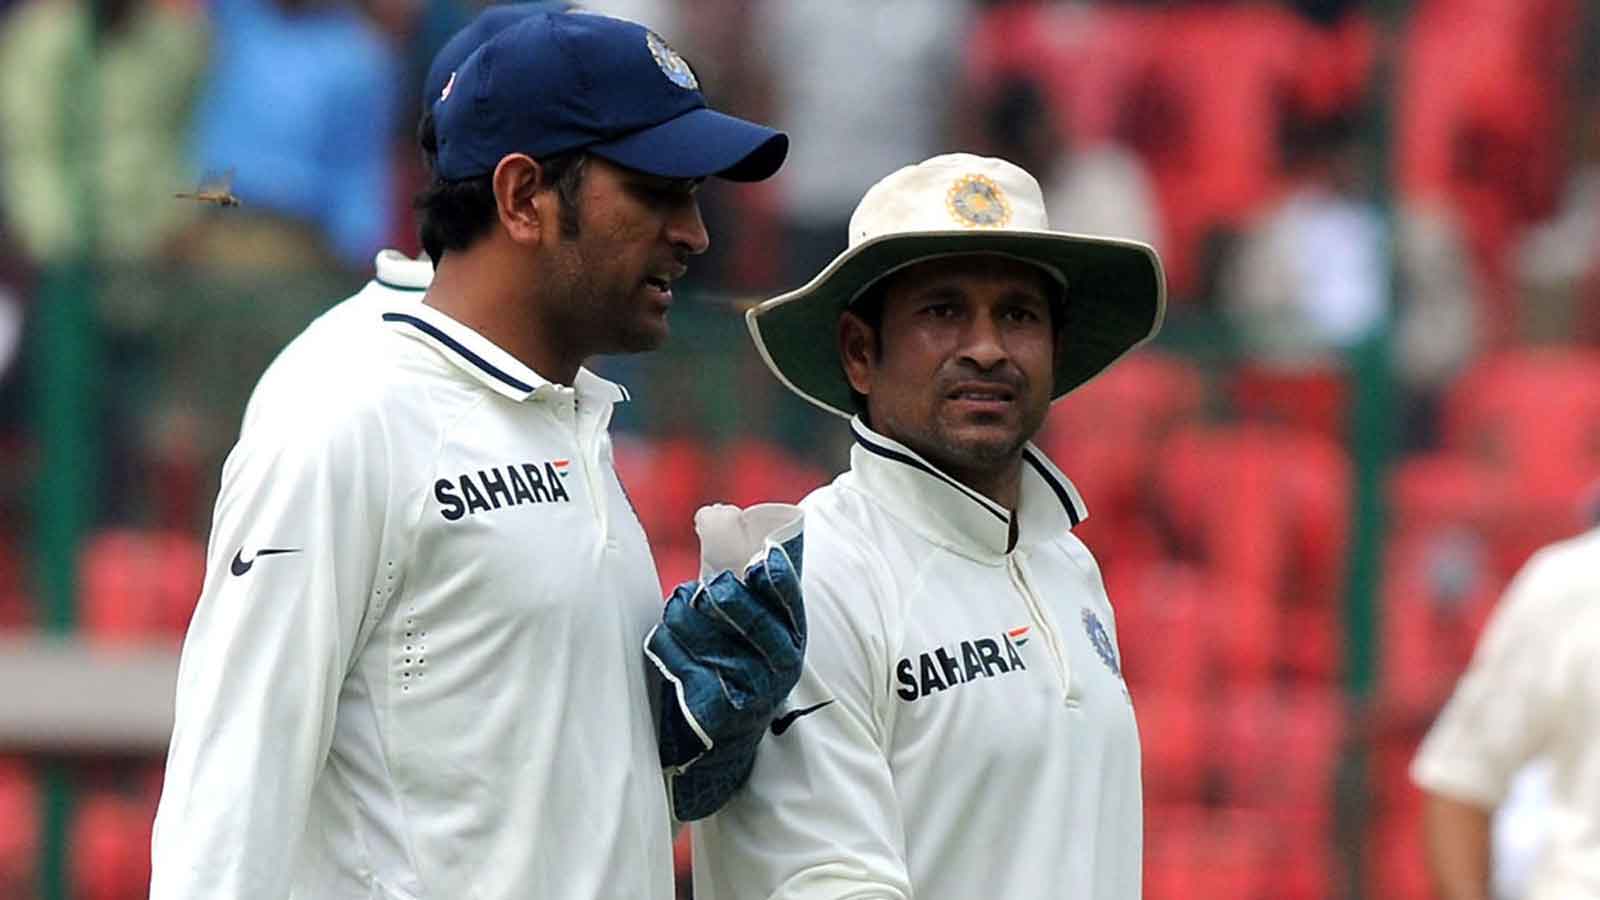 Saw MS Dhoni's acumen and told BCCI that he is the next captain: Sachin Tendulkar. Sports of India Videos